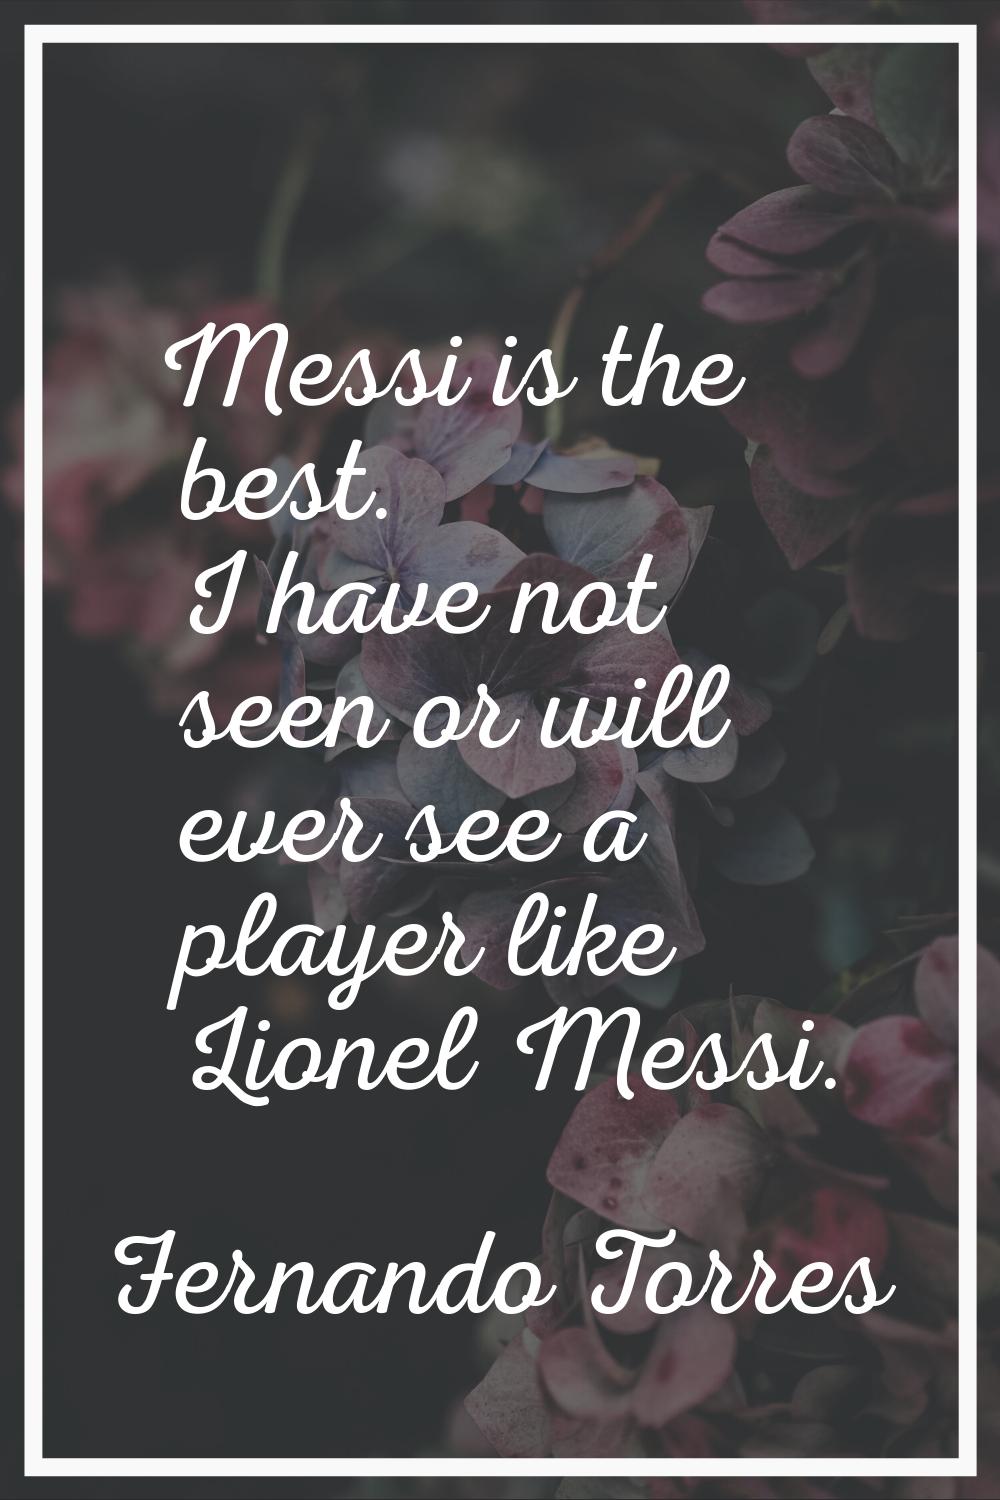 Messi is the best. I have not seen or will ever see a player like Lionel Messi.